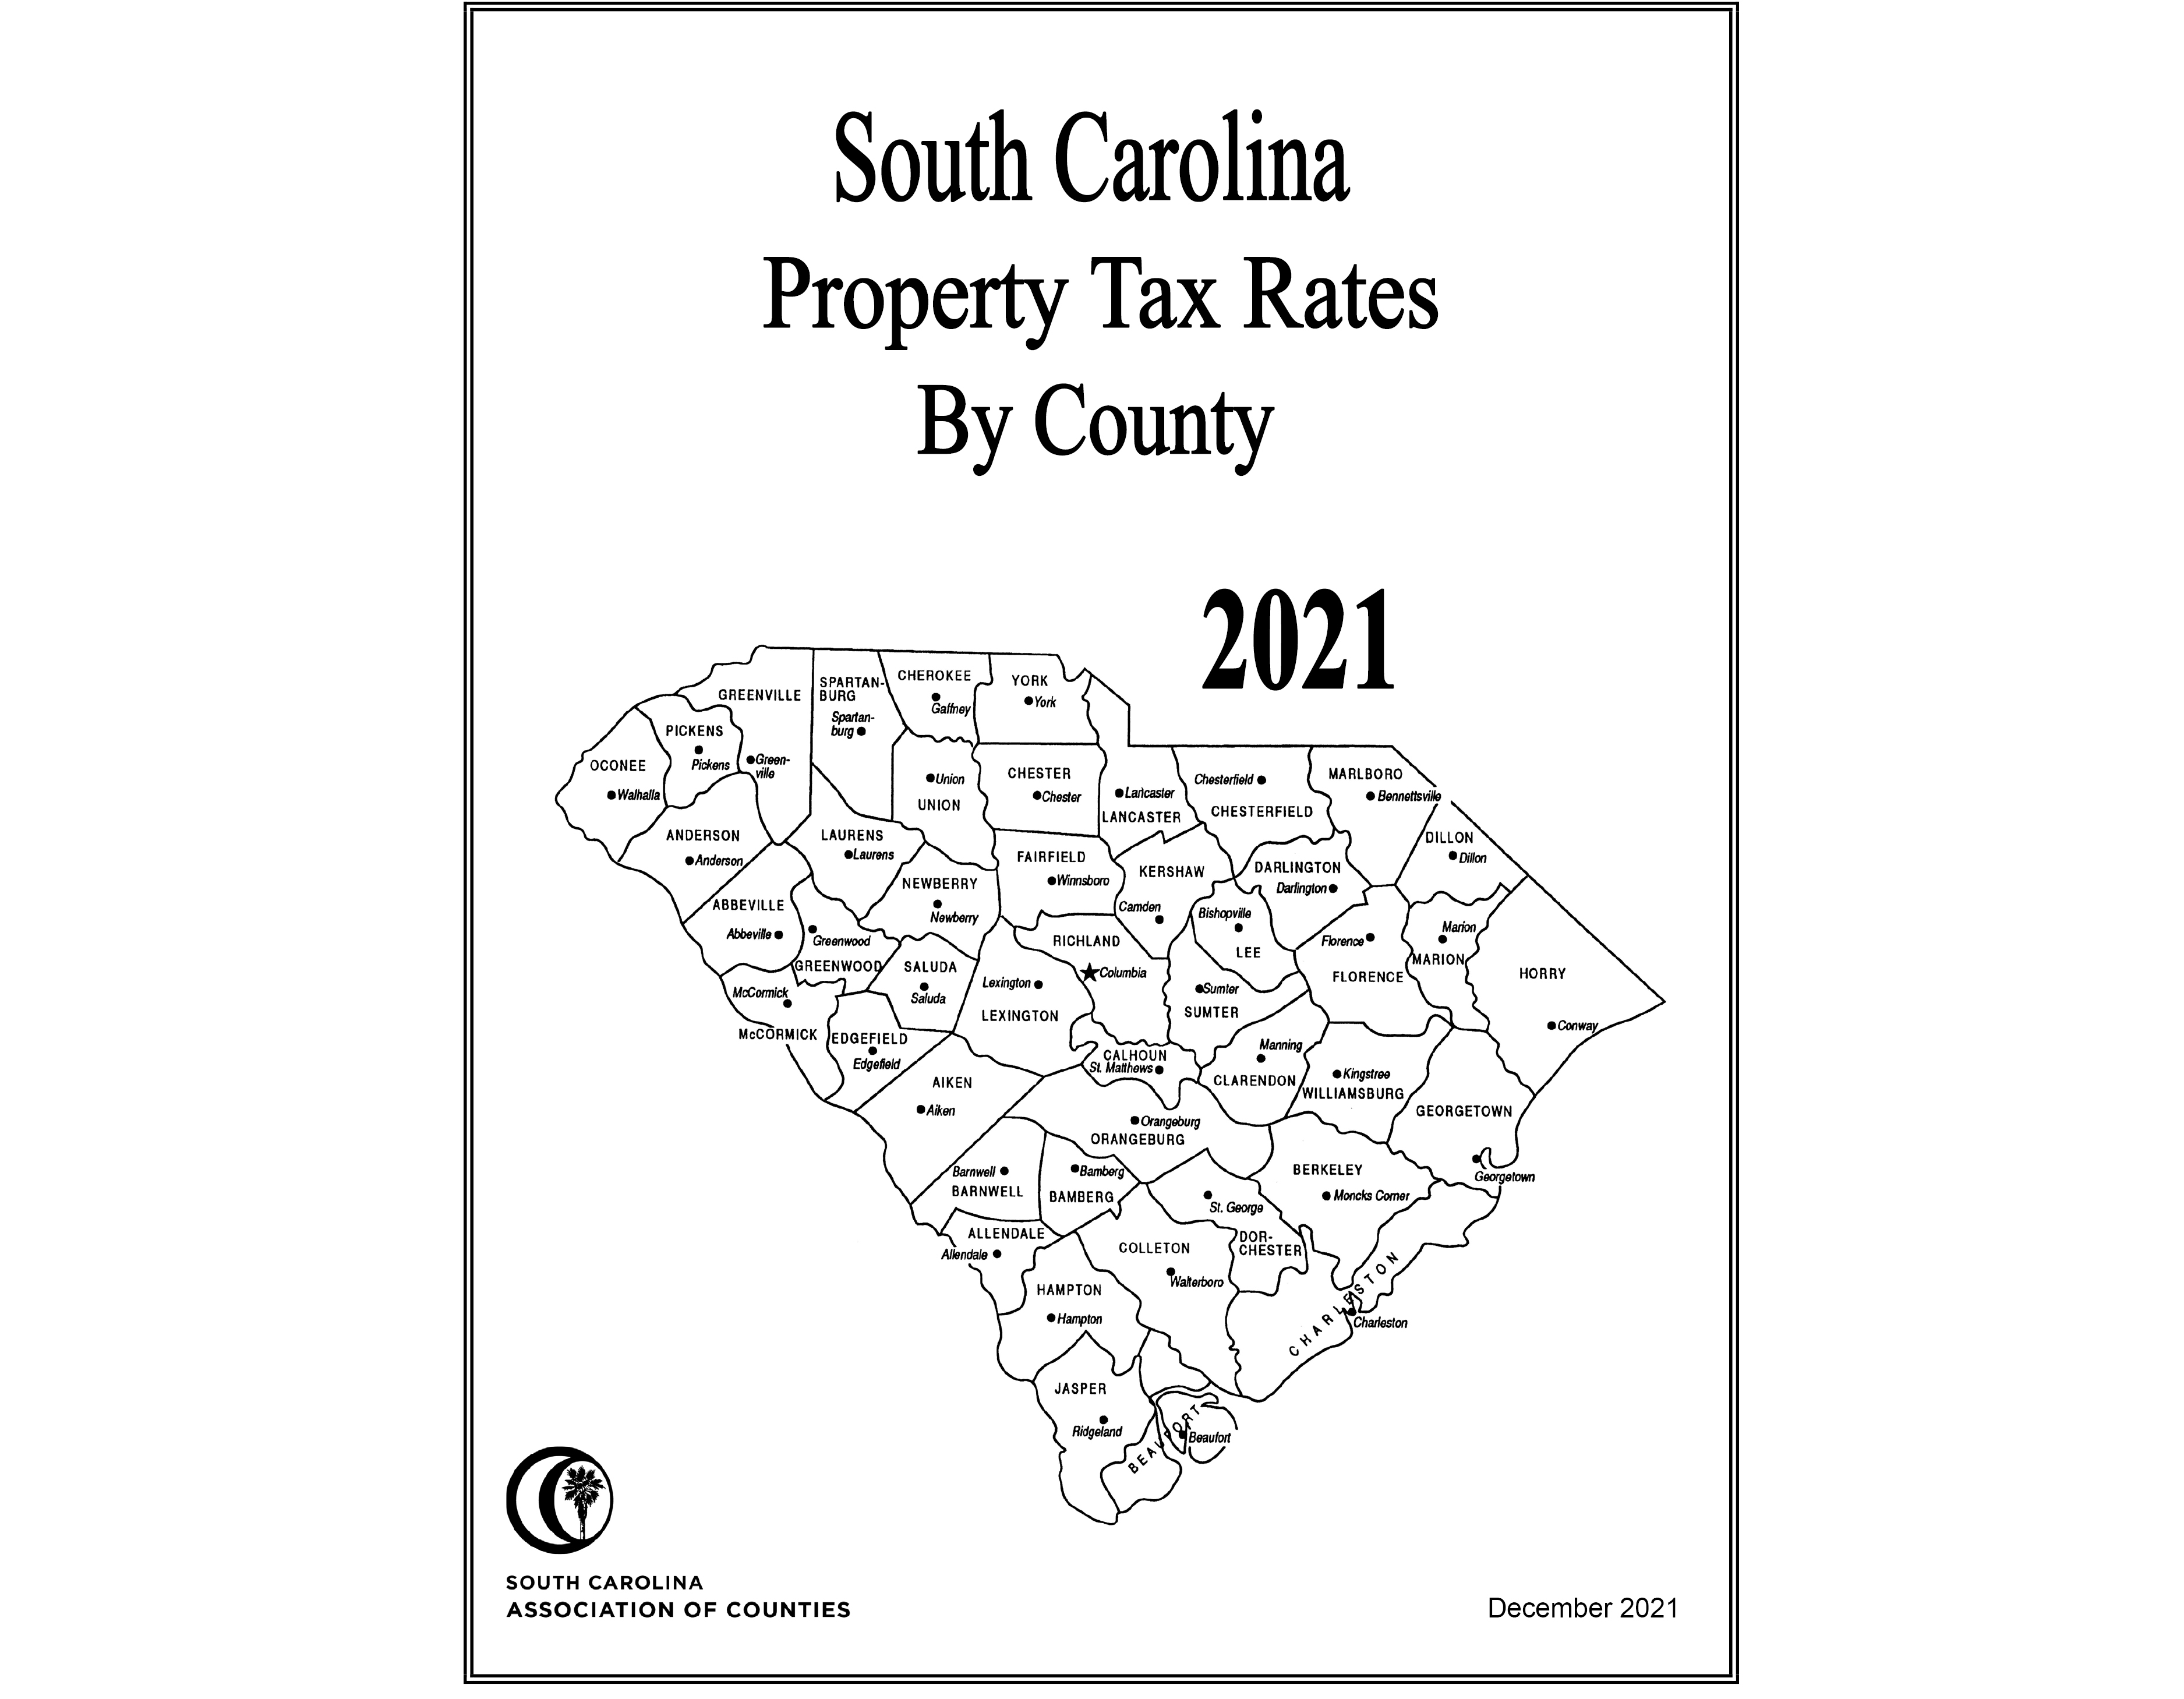 property-tax-rates-by-county-2021-south-carolina-association-of-counties